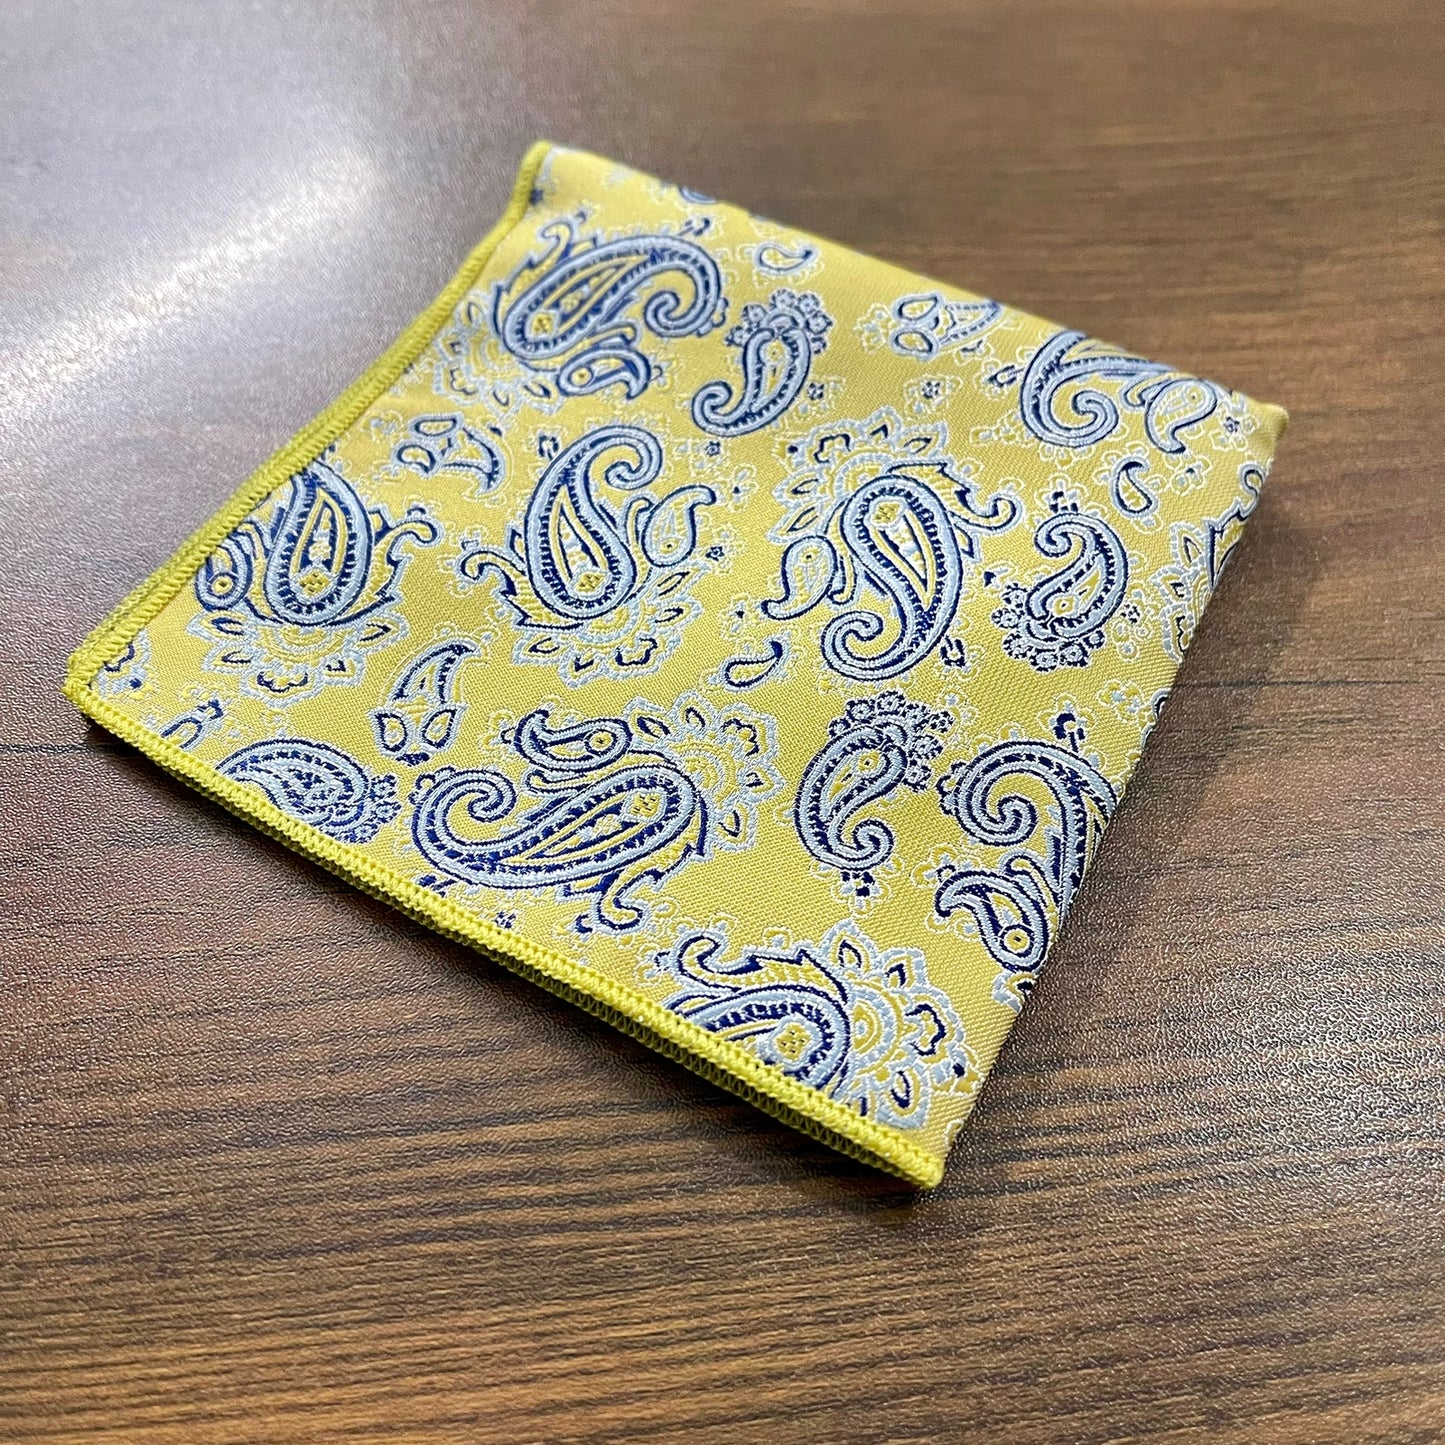 yellow and blue floral paisley pocket square for men in pakistan